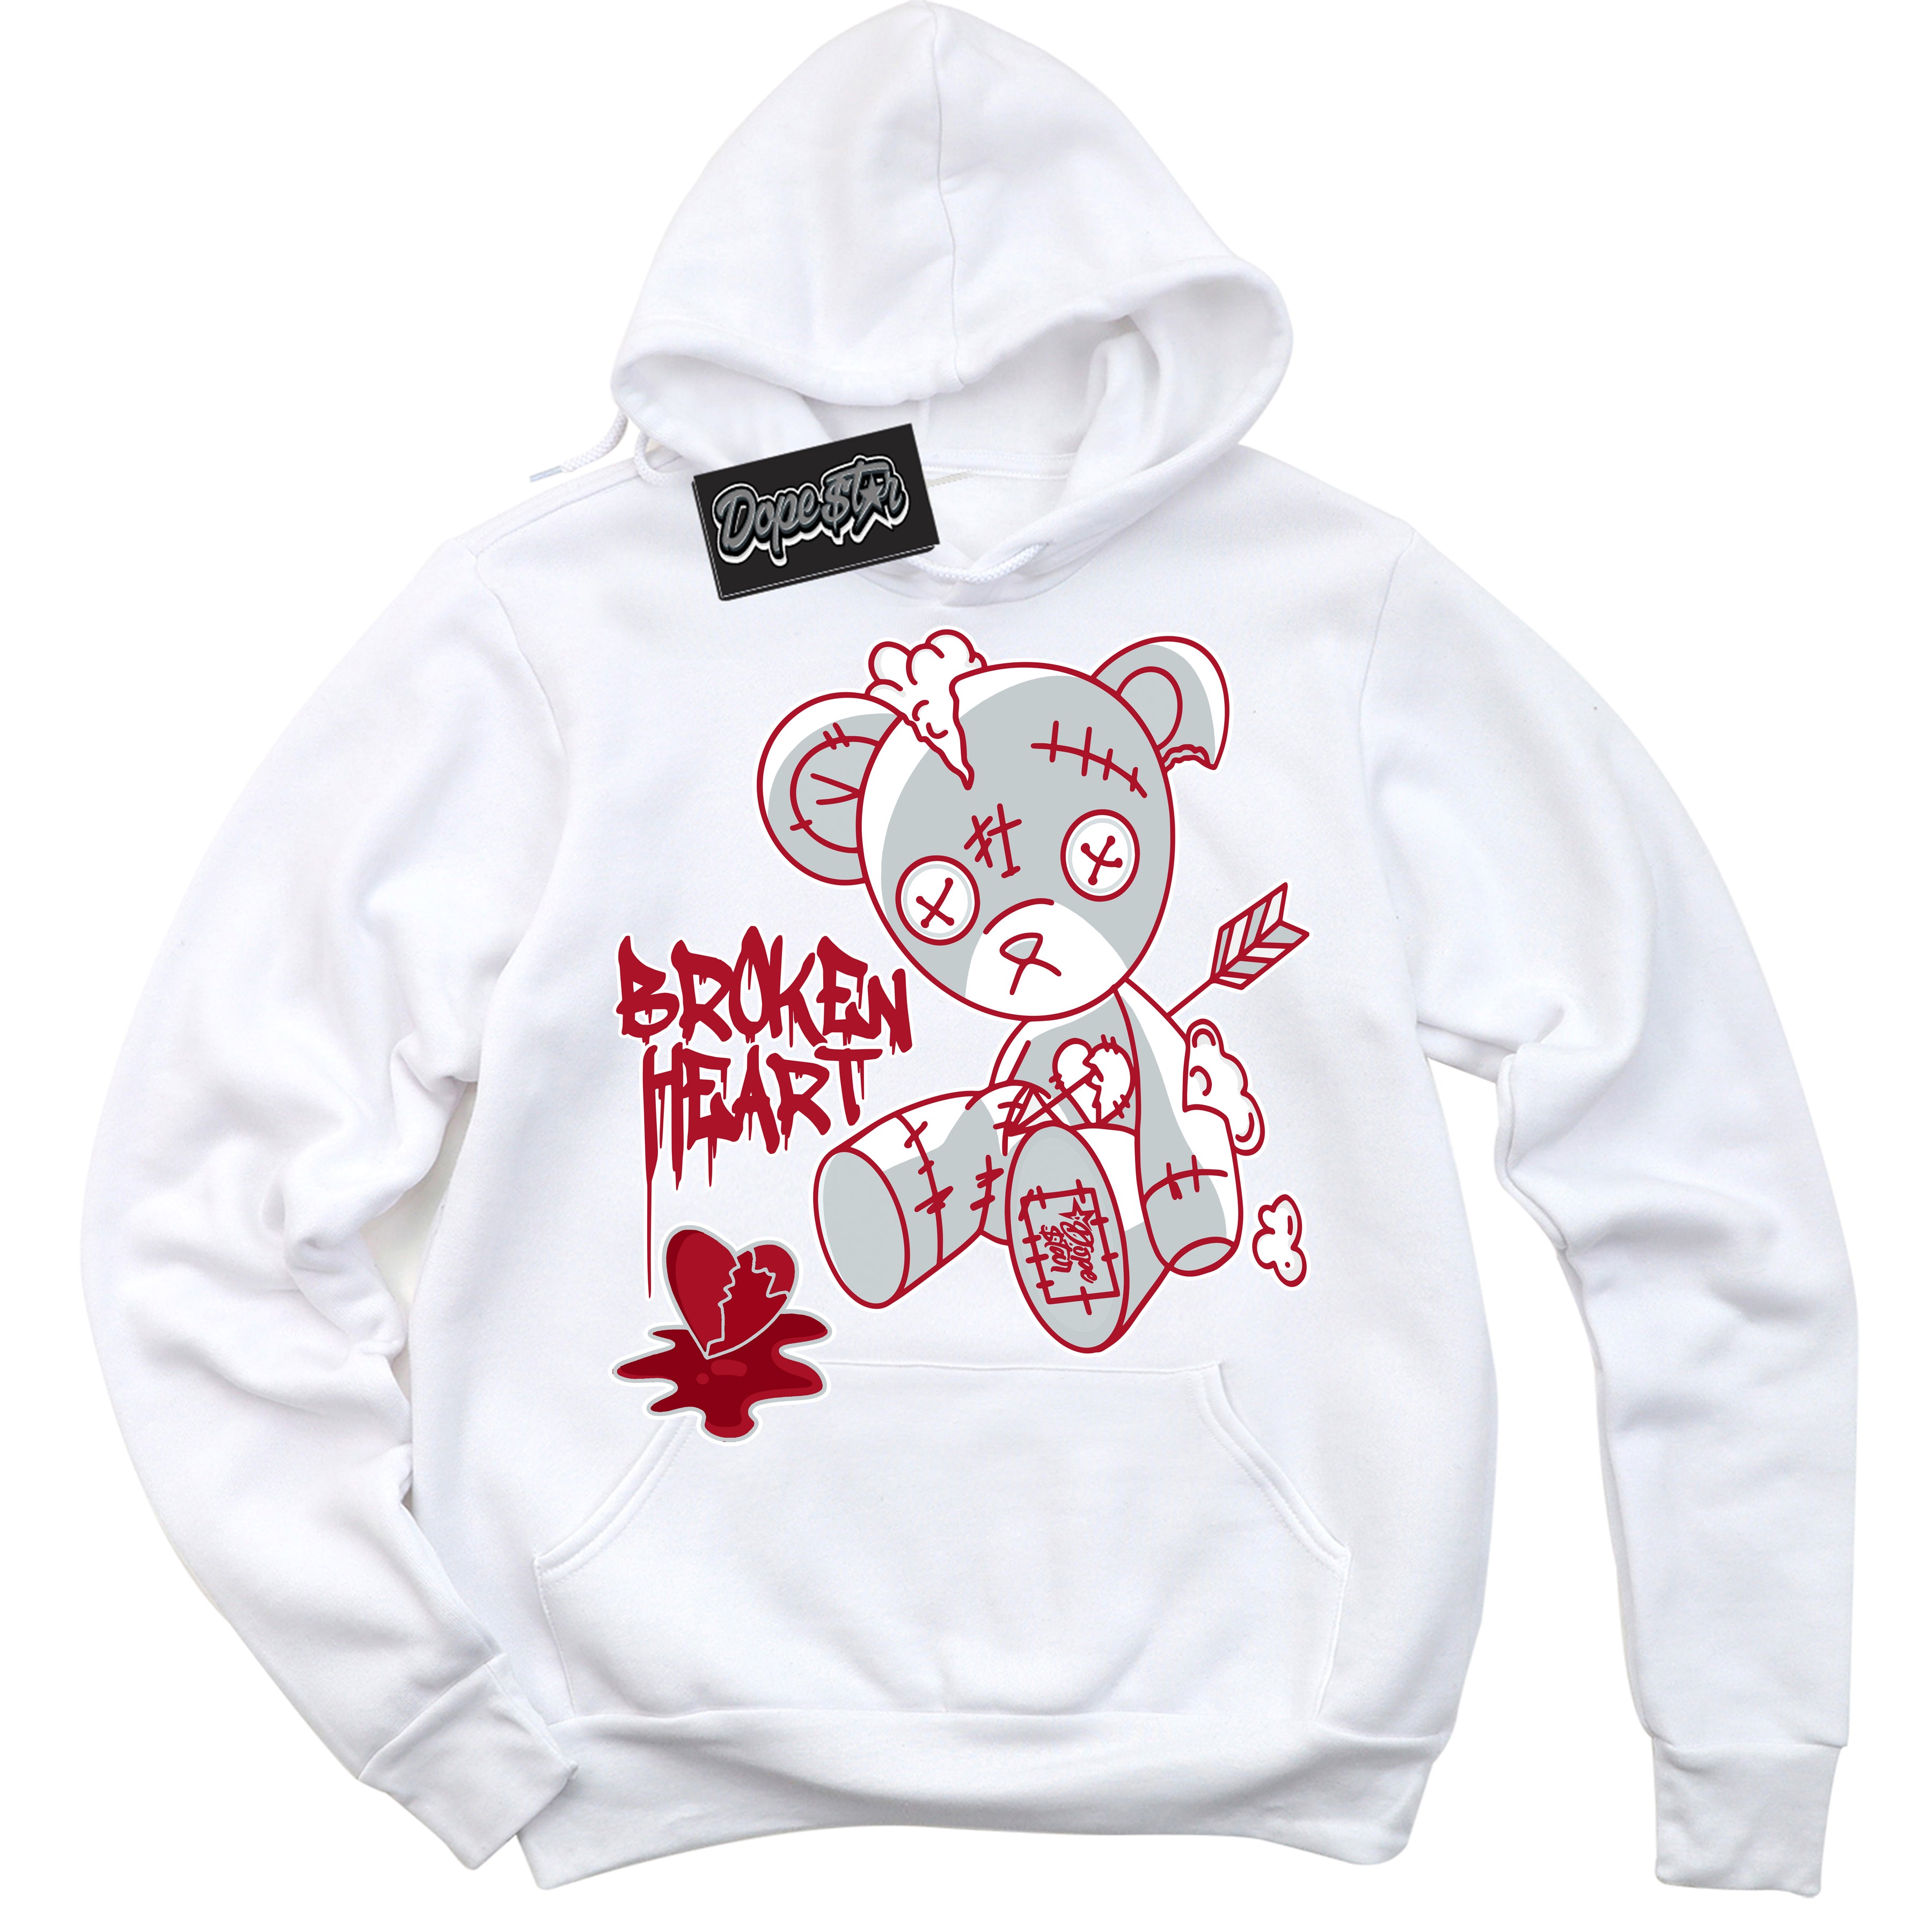 Cool White Hoodie with “ Broken Heart Bear ”  design that Perfectly Matches Reverse Ultraman Sneakers.